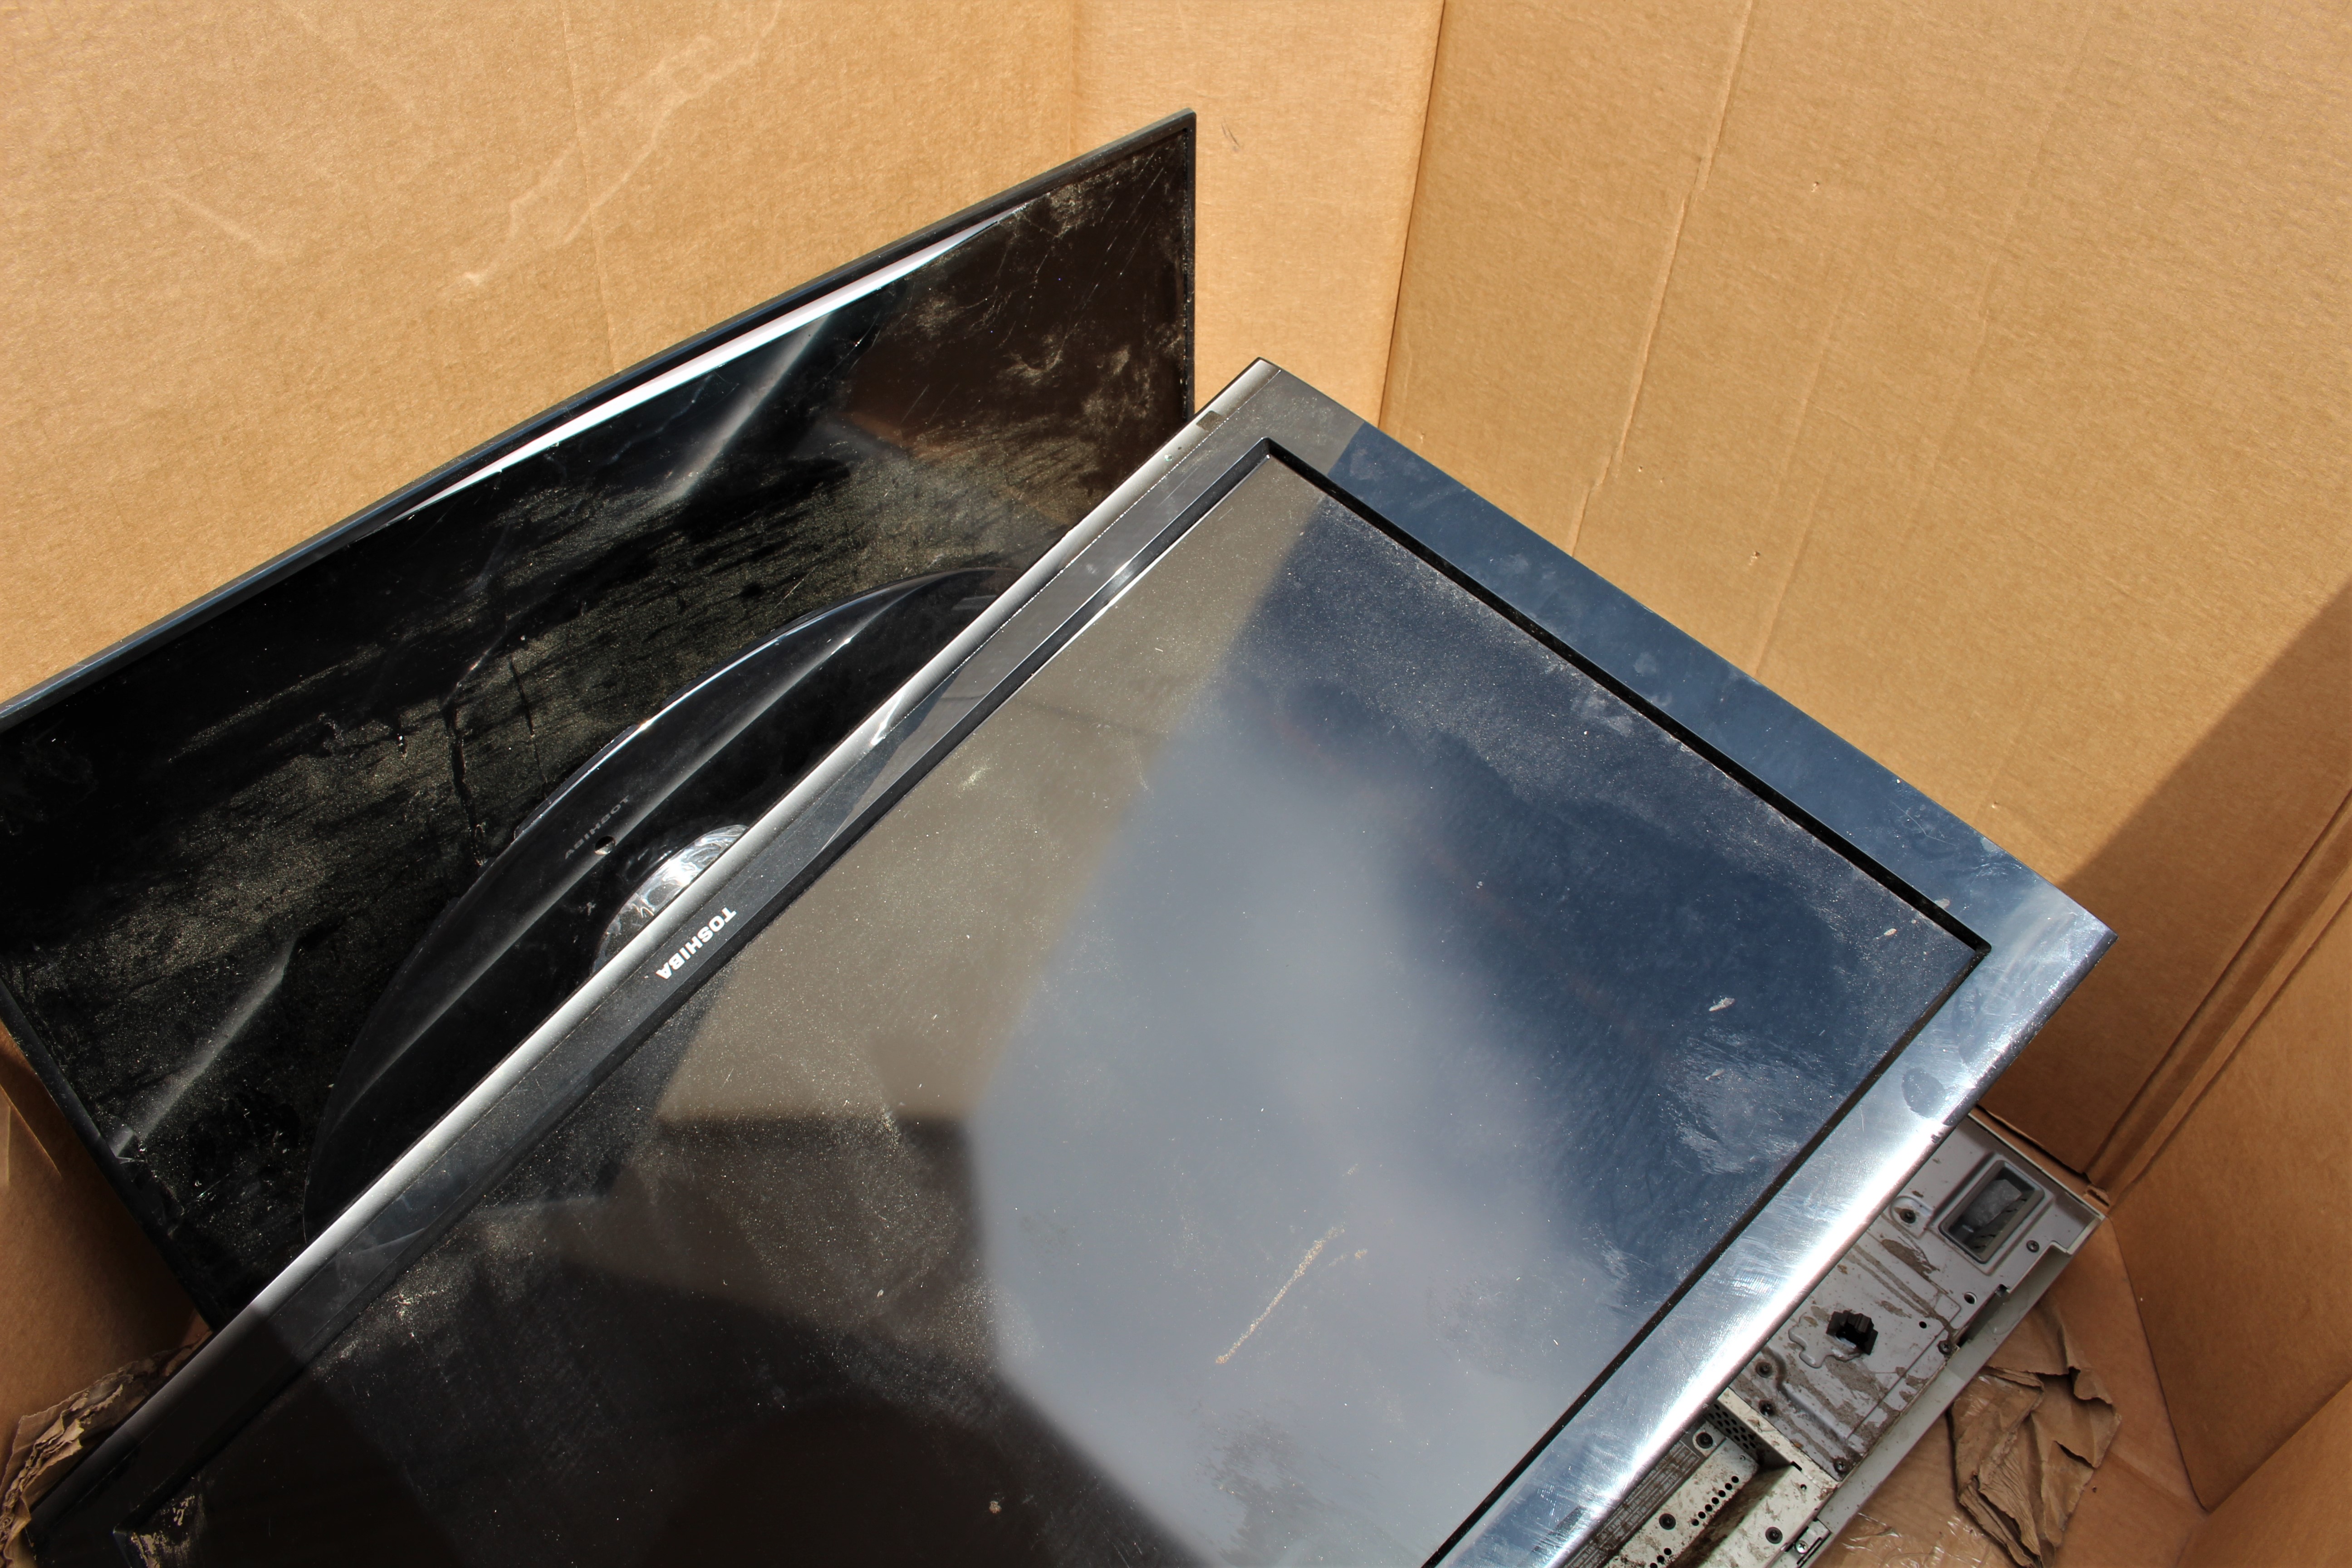 Televisions and other electronics gathered in a large cardboard box for recycling